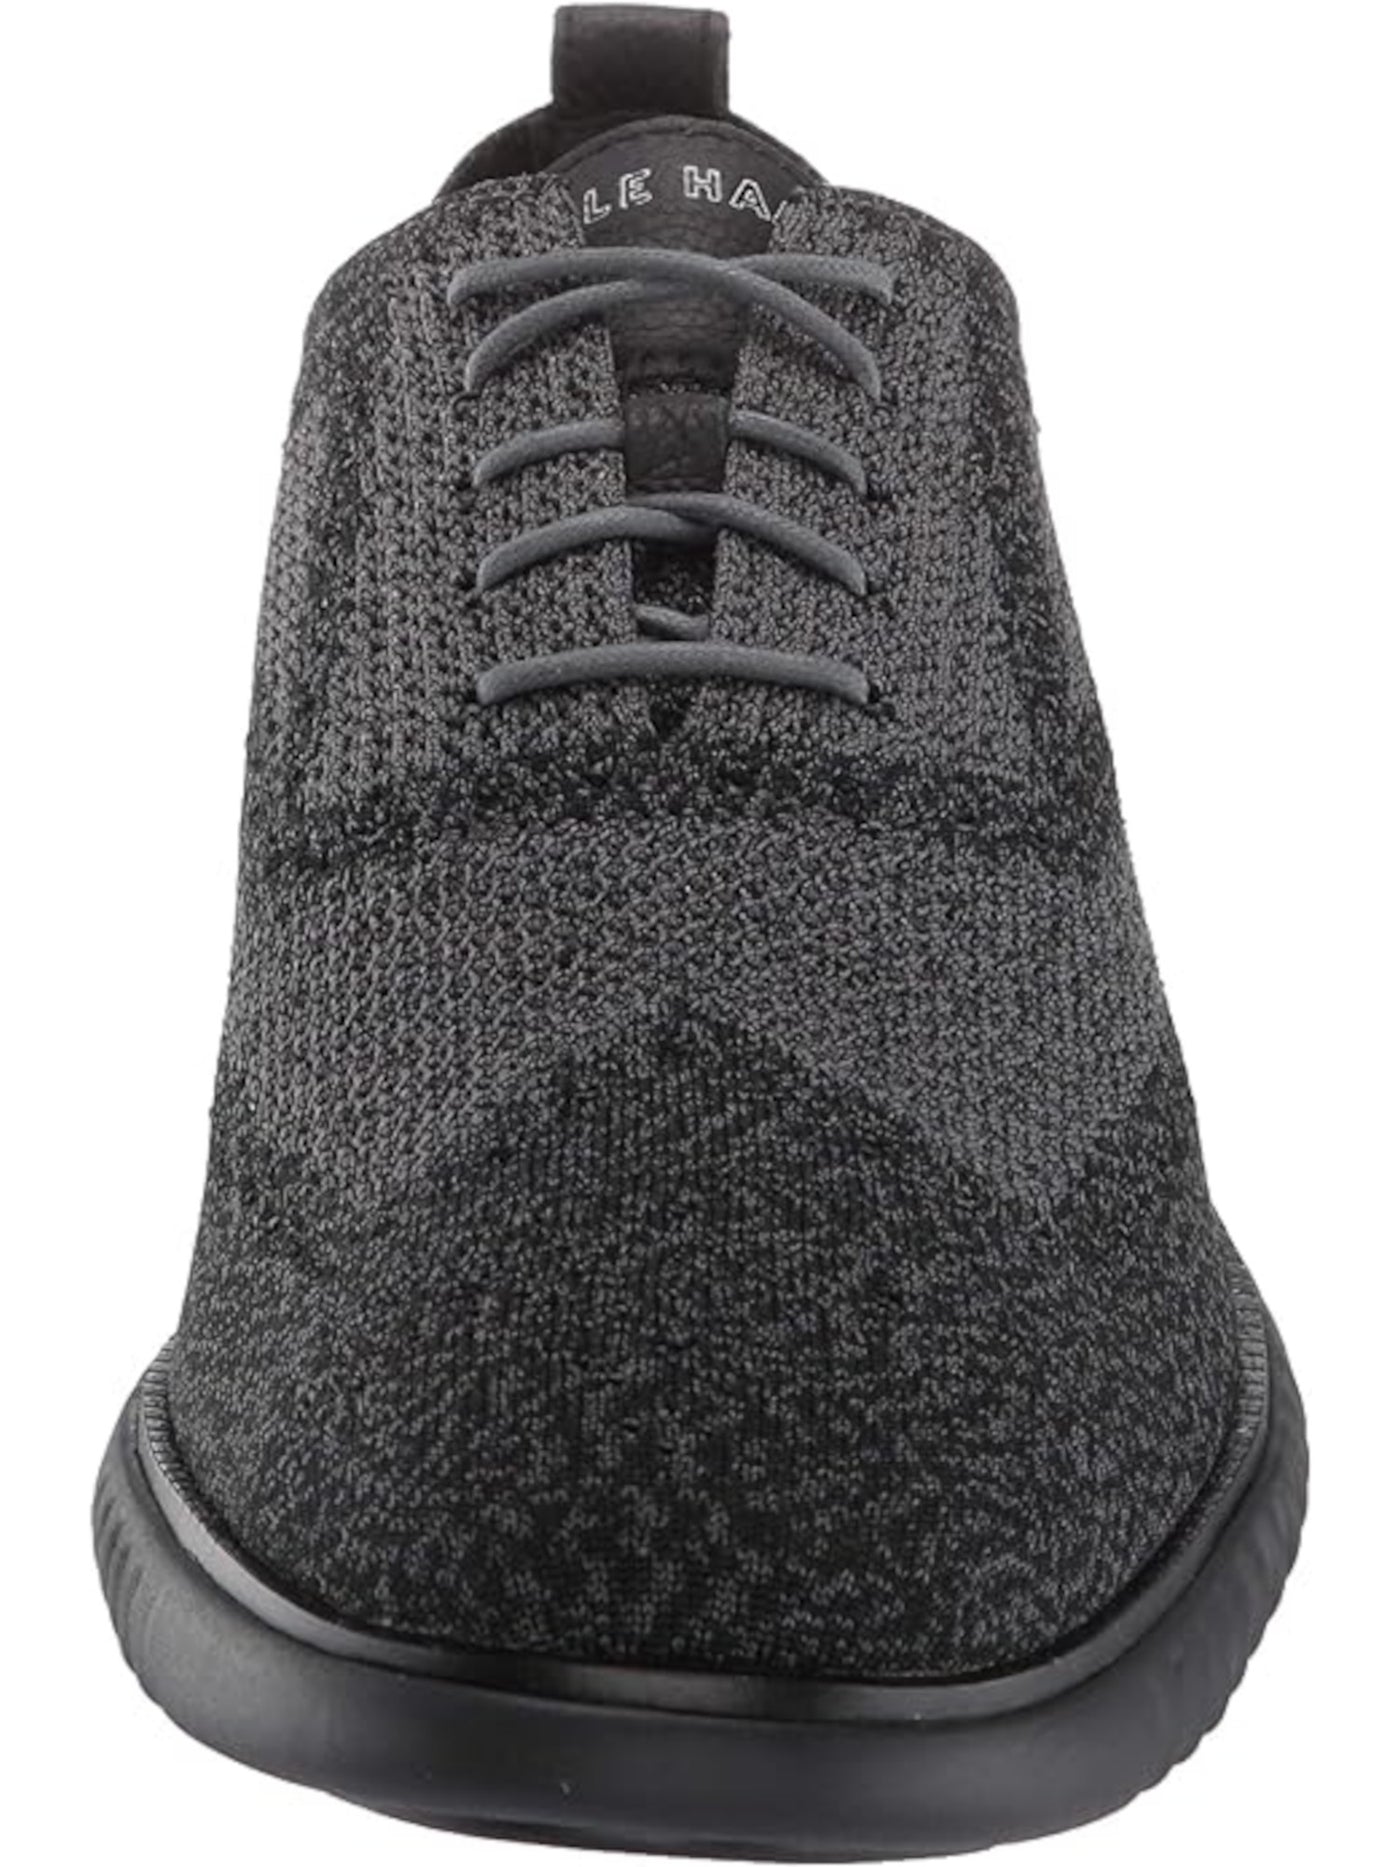 COLE HAAN GRANDSERIES Mens Black Colorblock Knit Back Pull-Tab Padded 2.zer�grand Wingtip Toe Wedge Lace-Up Oxford Shoes 12 M